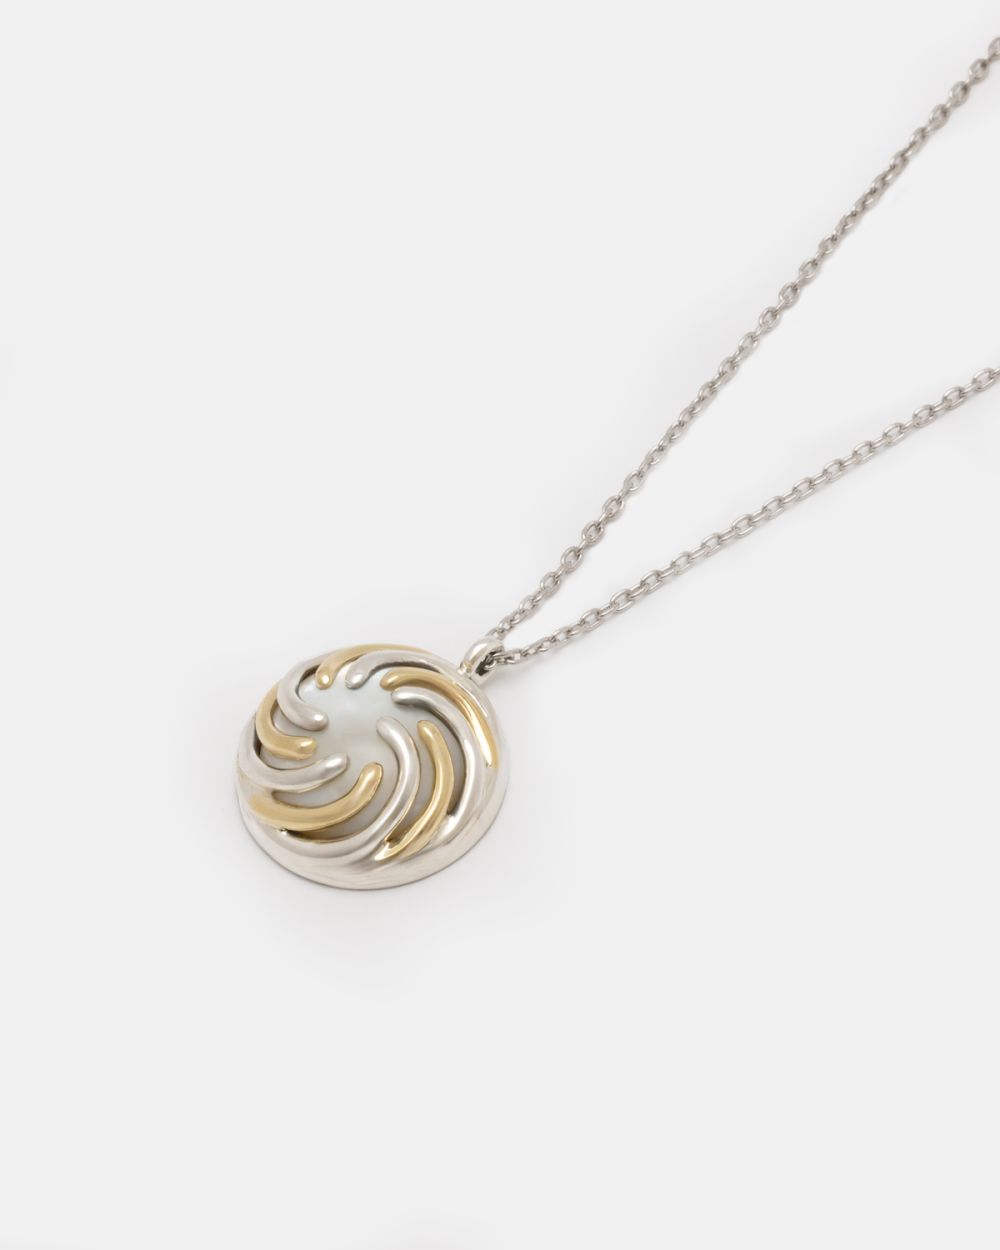 Splendor Necklace in Silver and Gold